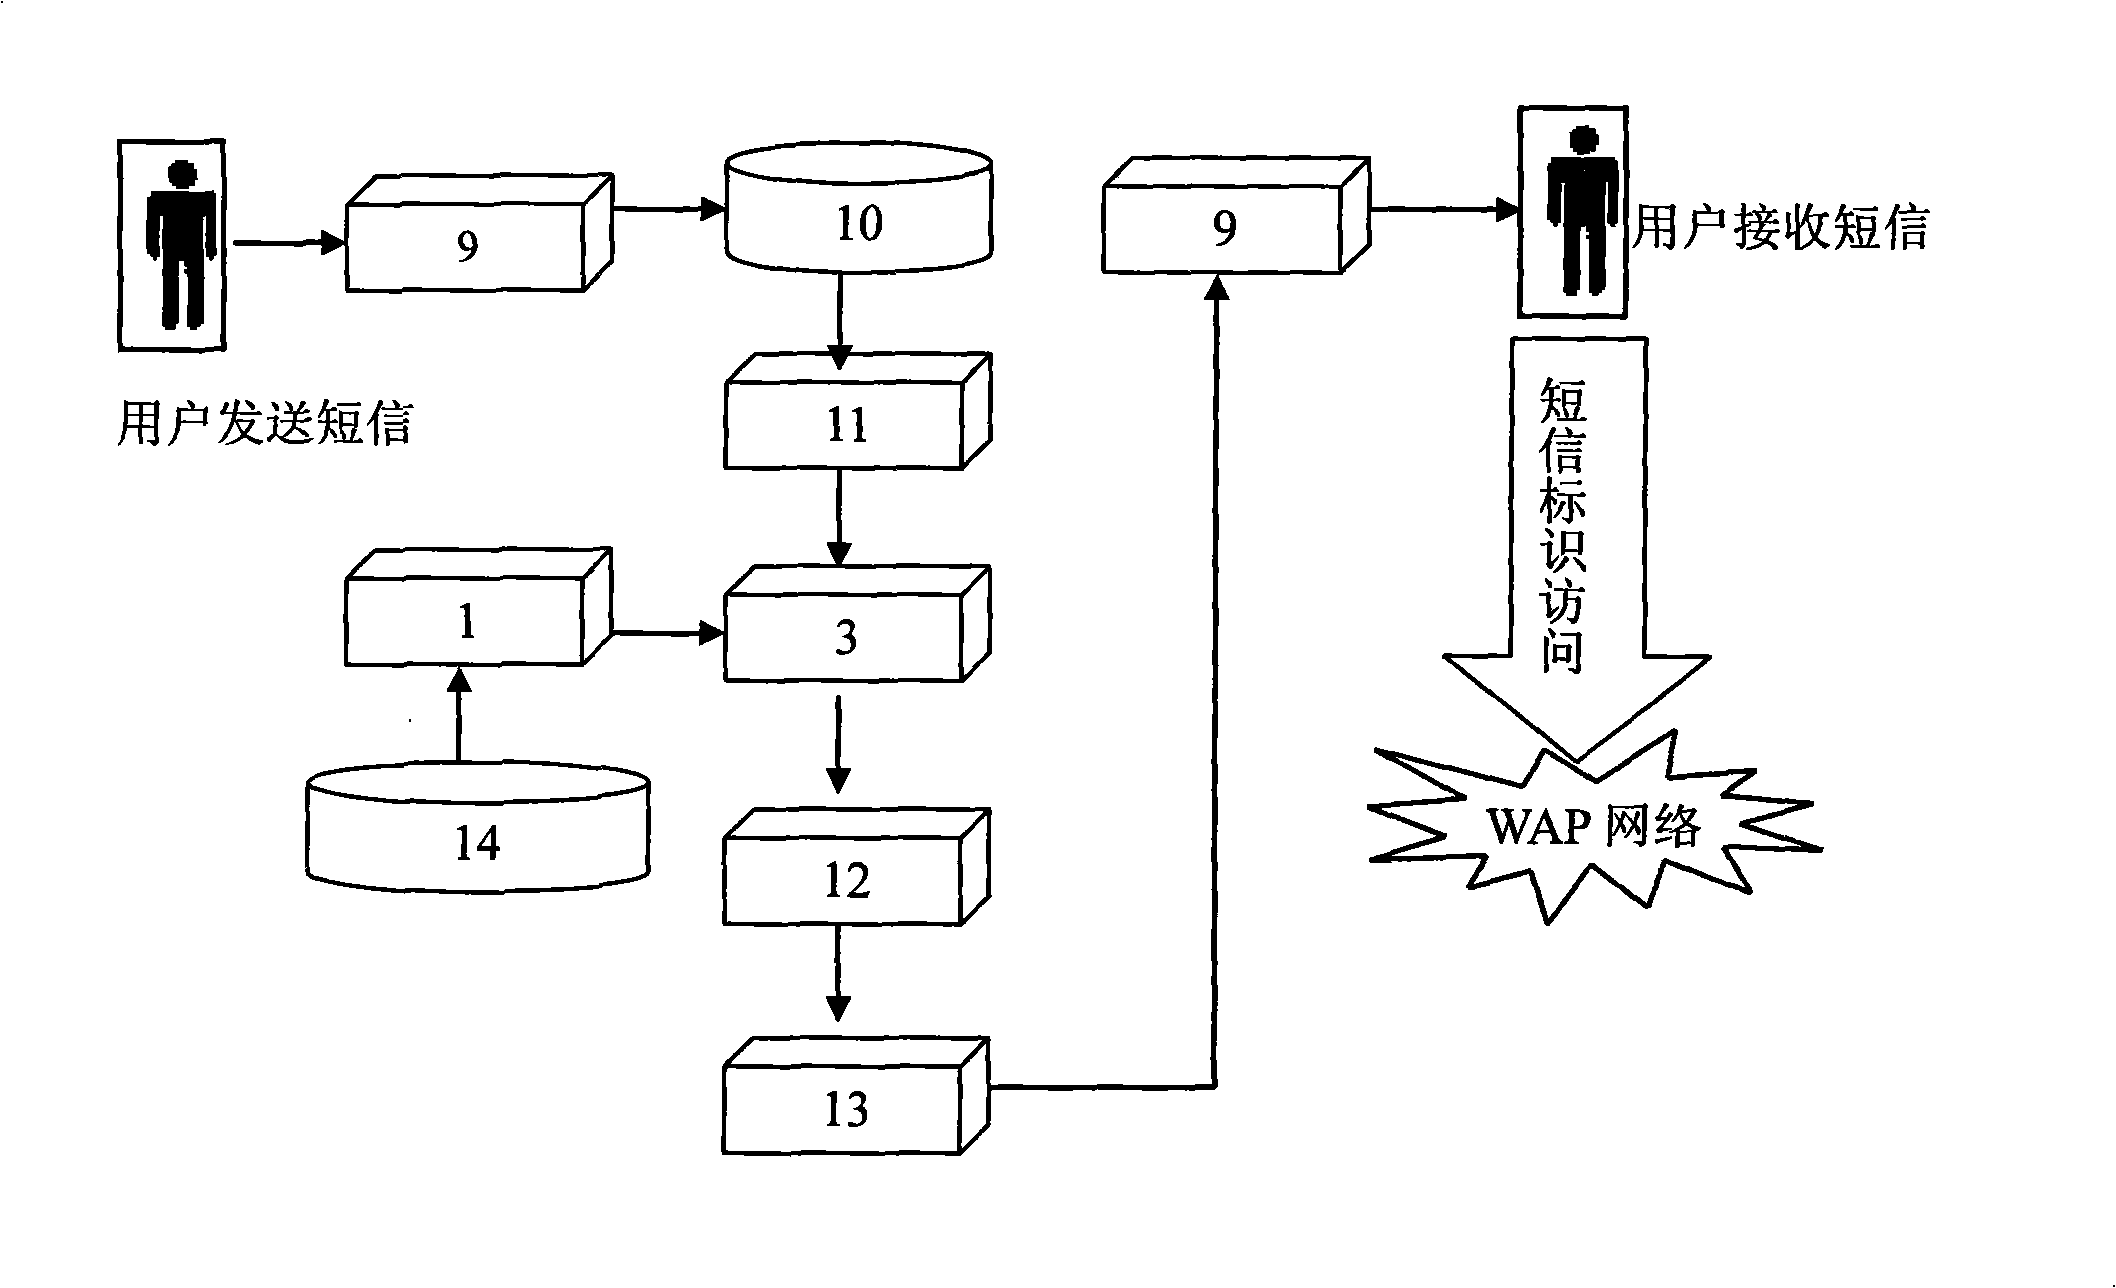 Point-to-point identification method and system for embedded chaining short message